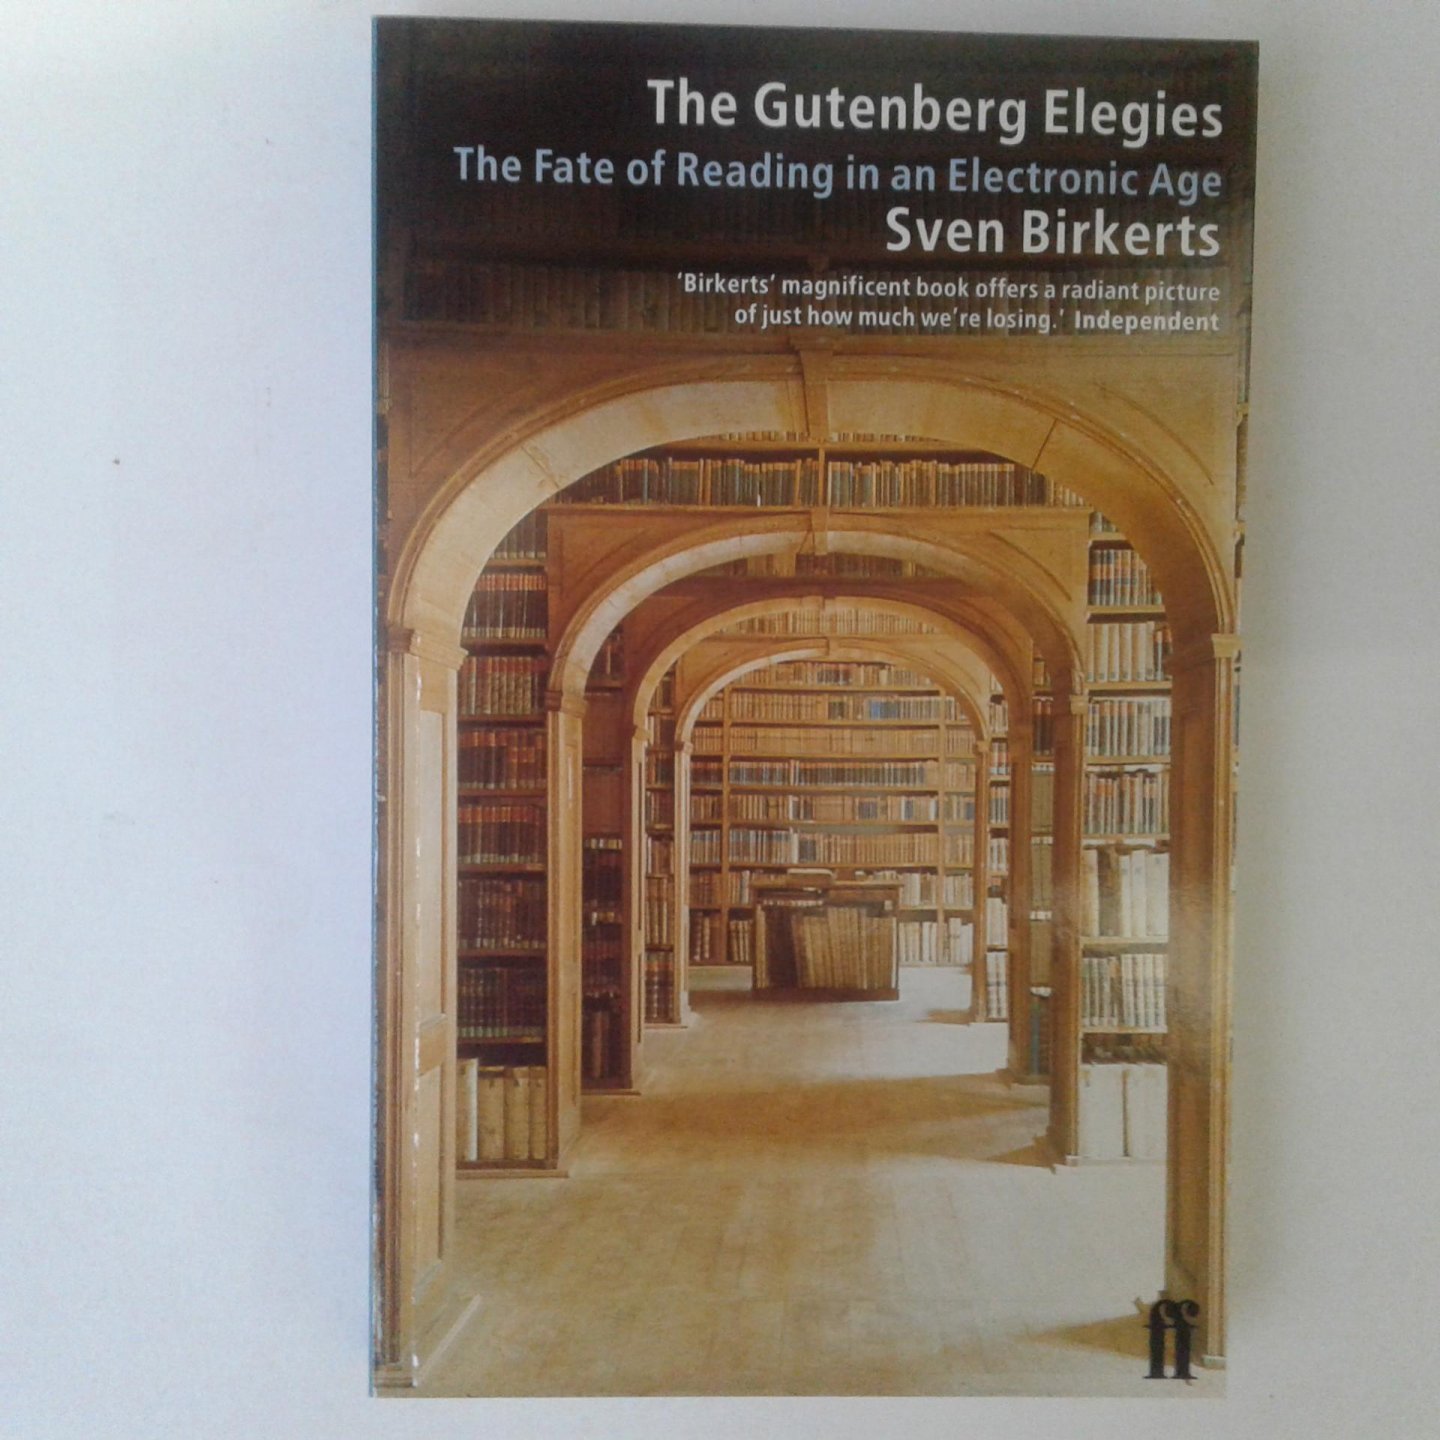 Birkerts, Sven - The Gutenberg Elegies ; The Fate of Reading in an Electronic Age